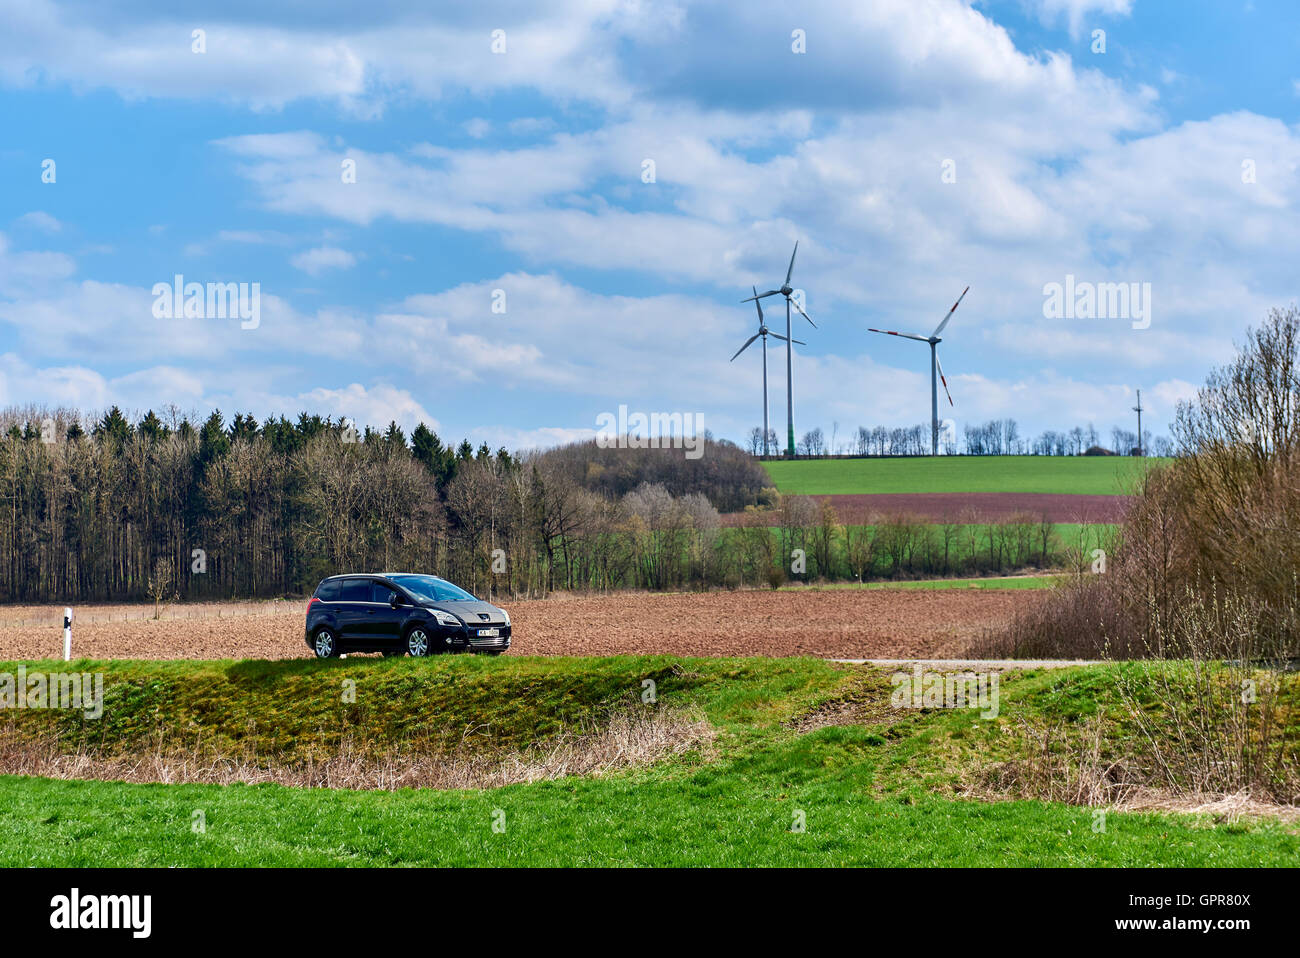 Black color Peugeot 5008 stopped on a rural road in Germany Stock Photo